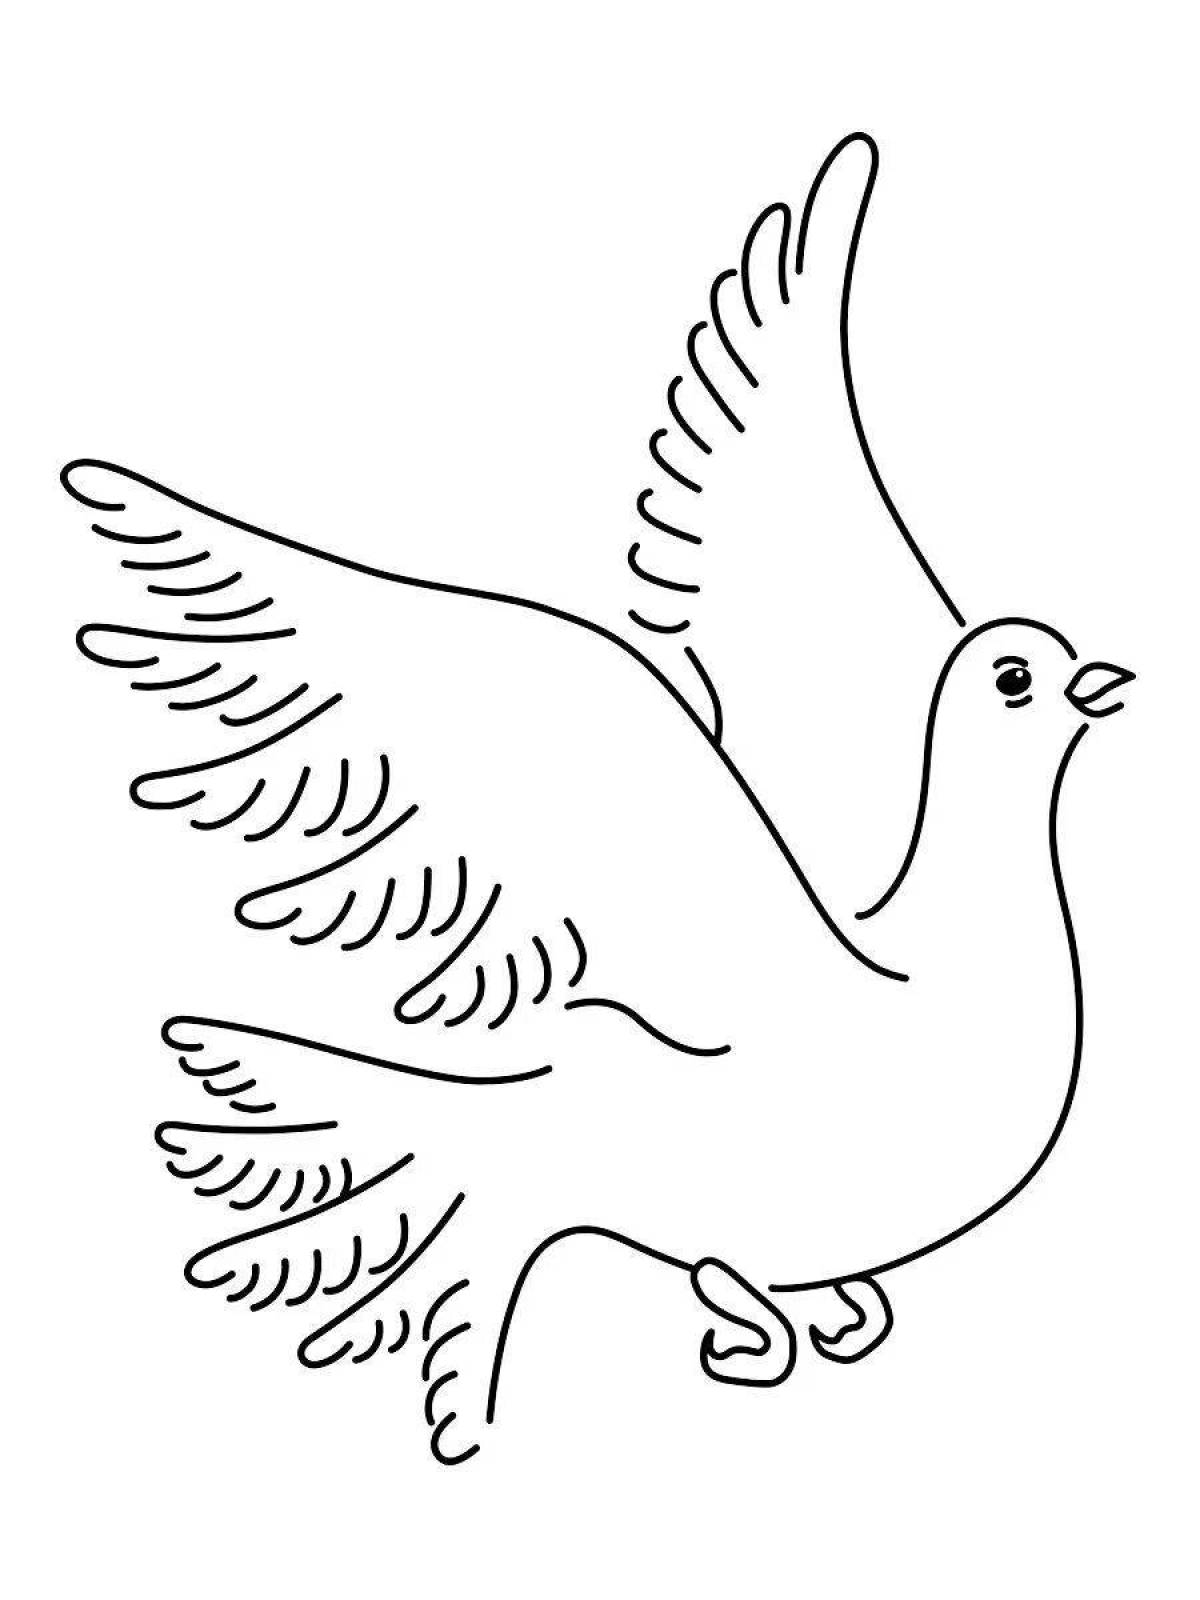 Exciting coloring dove for children 3-4 years old